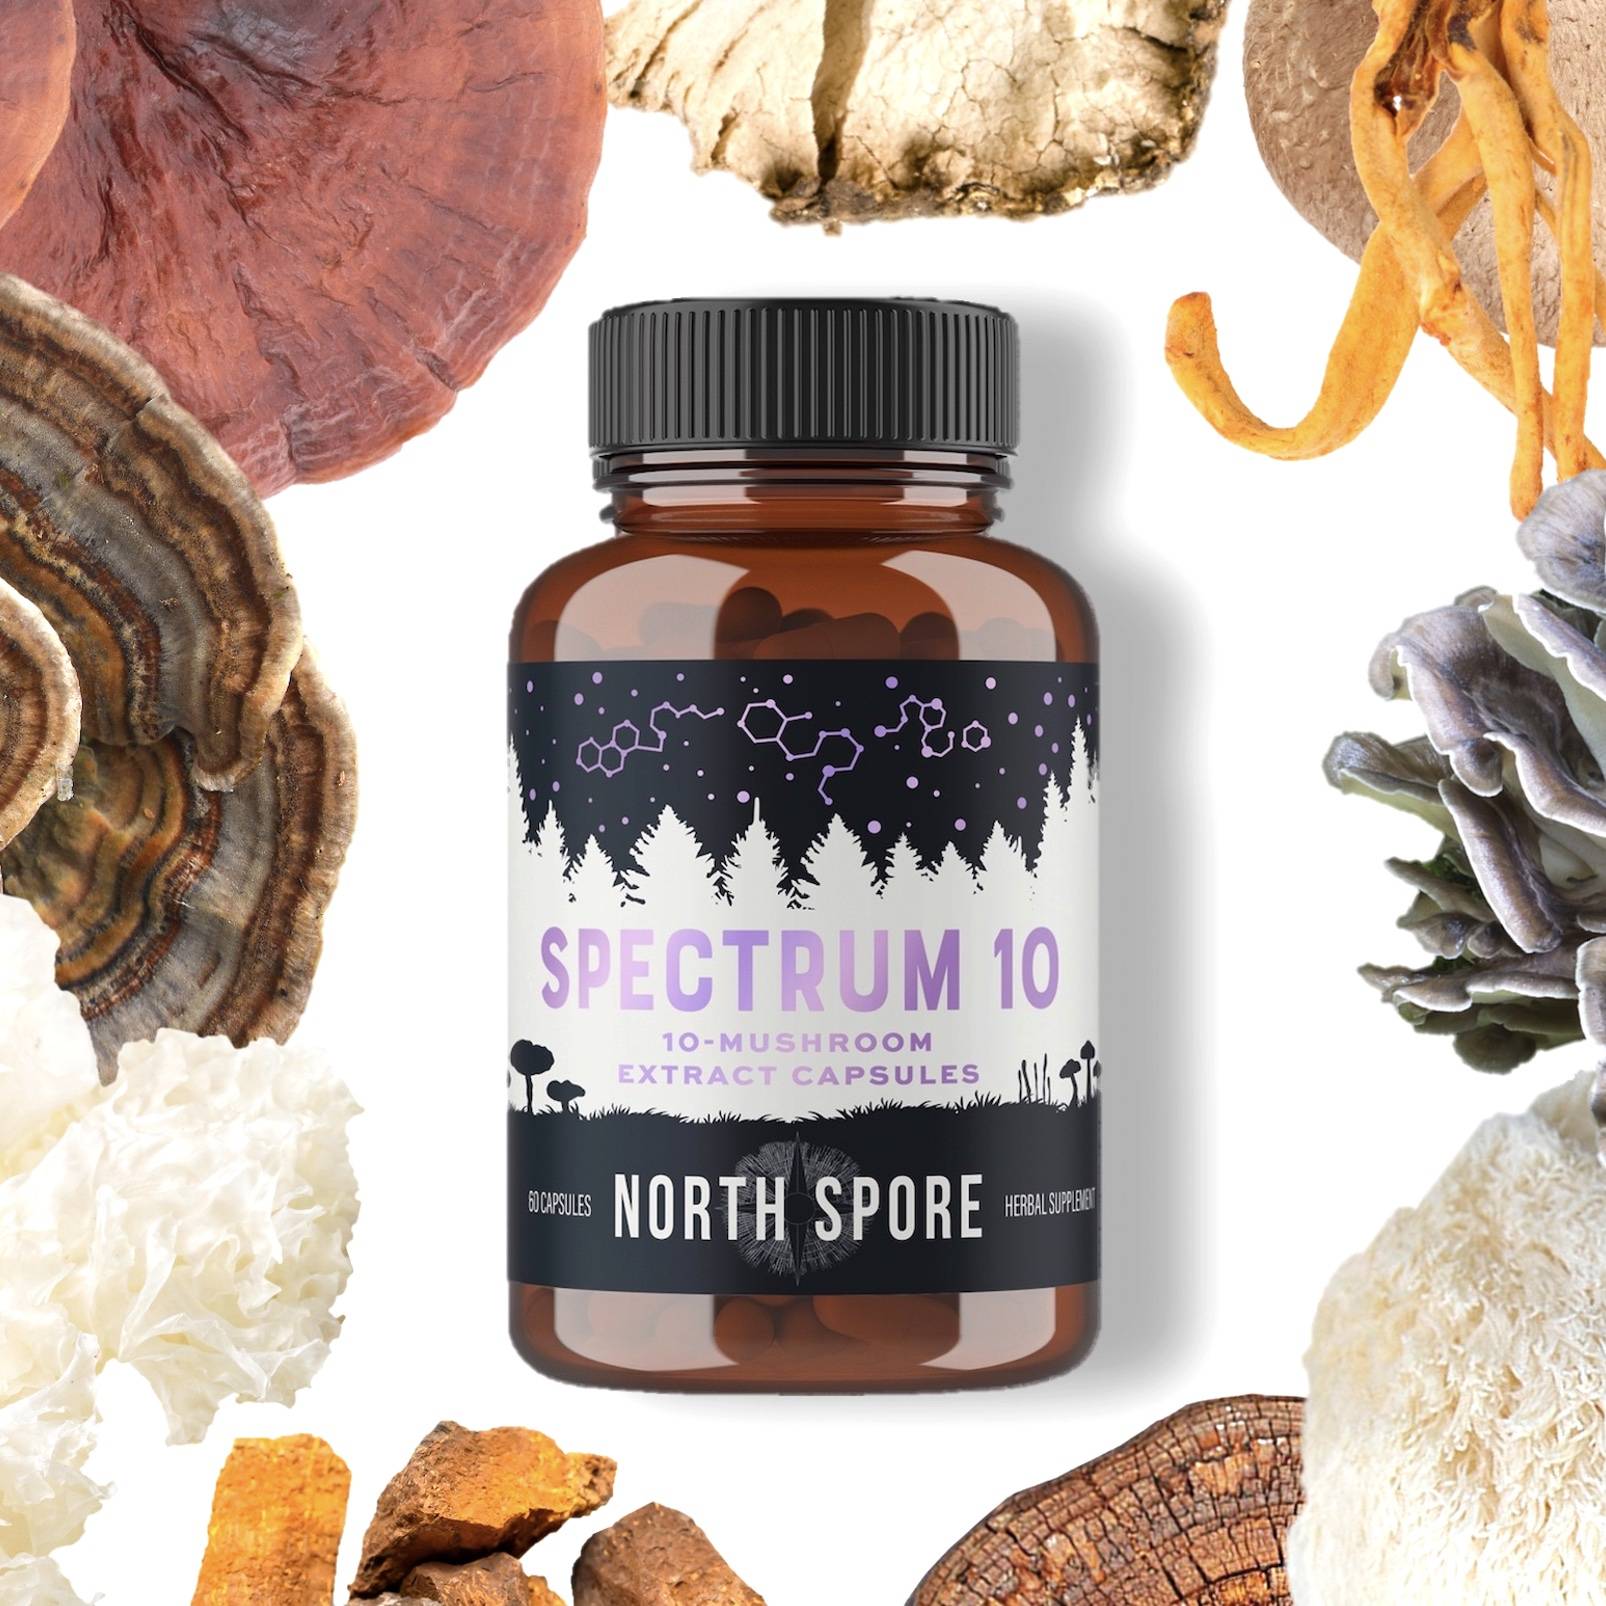 Spectrum 10 capsule bottle surrounded by mushrooms